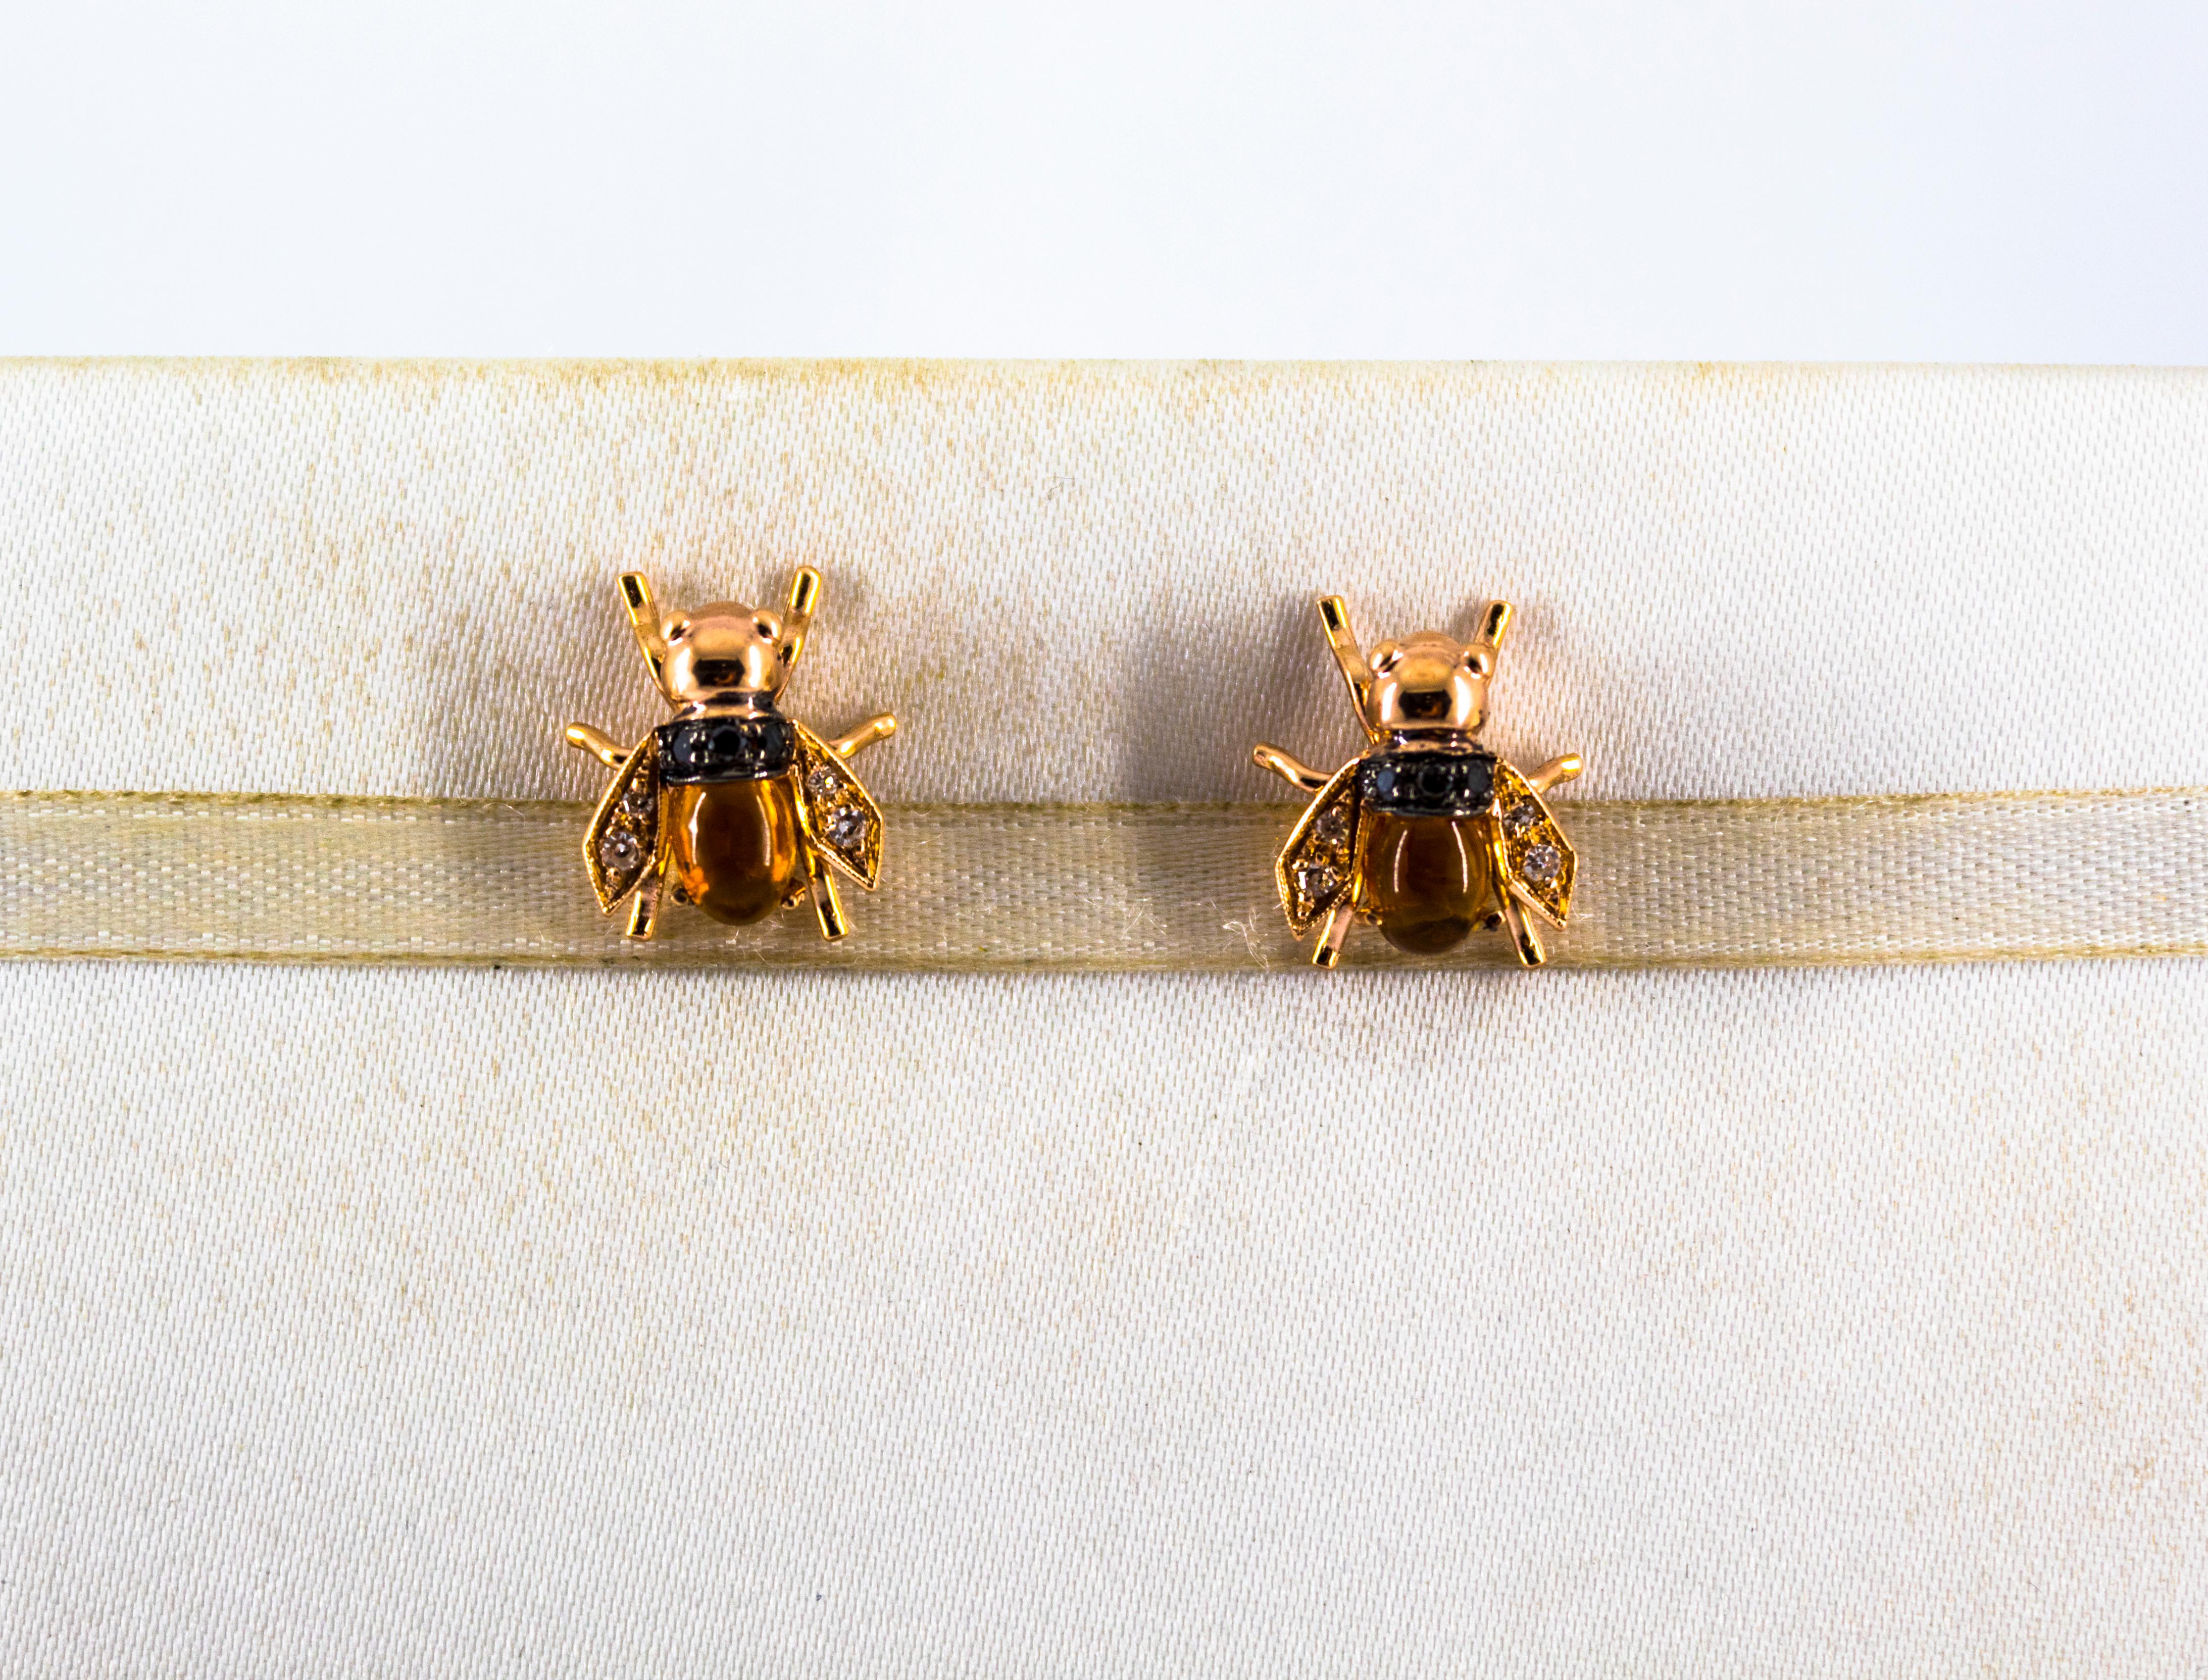 These Earrings are made of 9K Yellow Gold.
These Earrings have 0.18 Carats of White Diamonds.
These Earrings have 0.06 Carats of Black Diamonds.
These Earrings have 2.00 Carats of Citrine but they are available also with Amethyst or Ametrine.
All